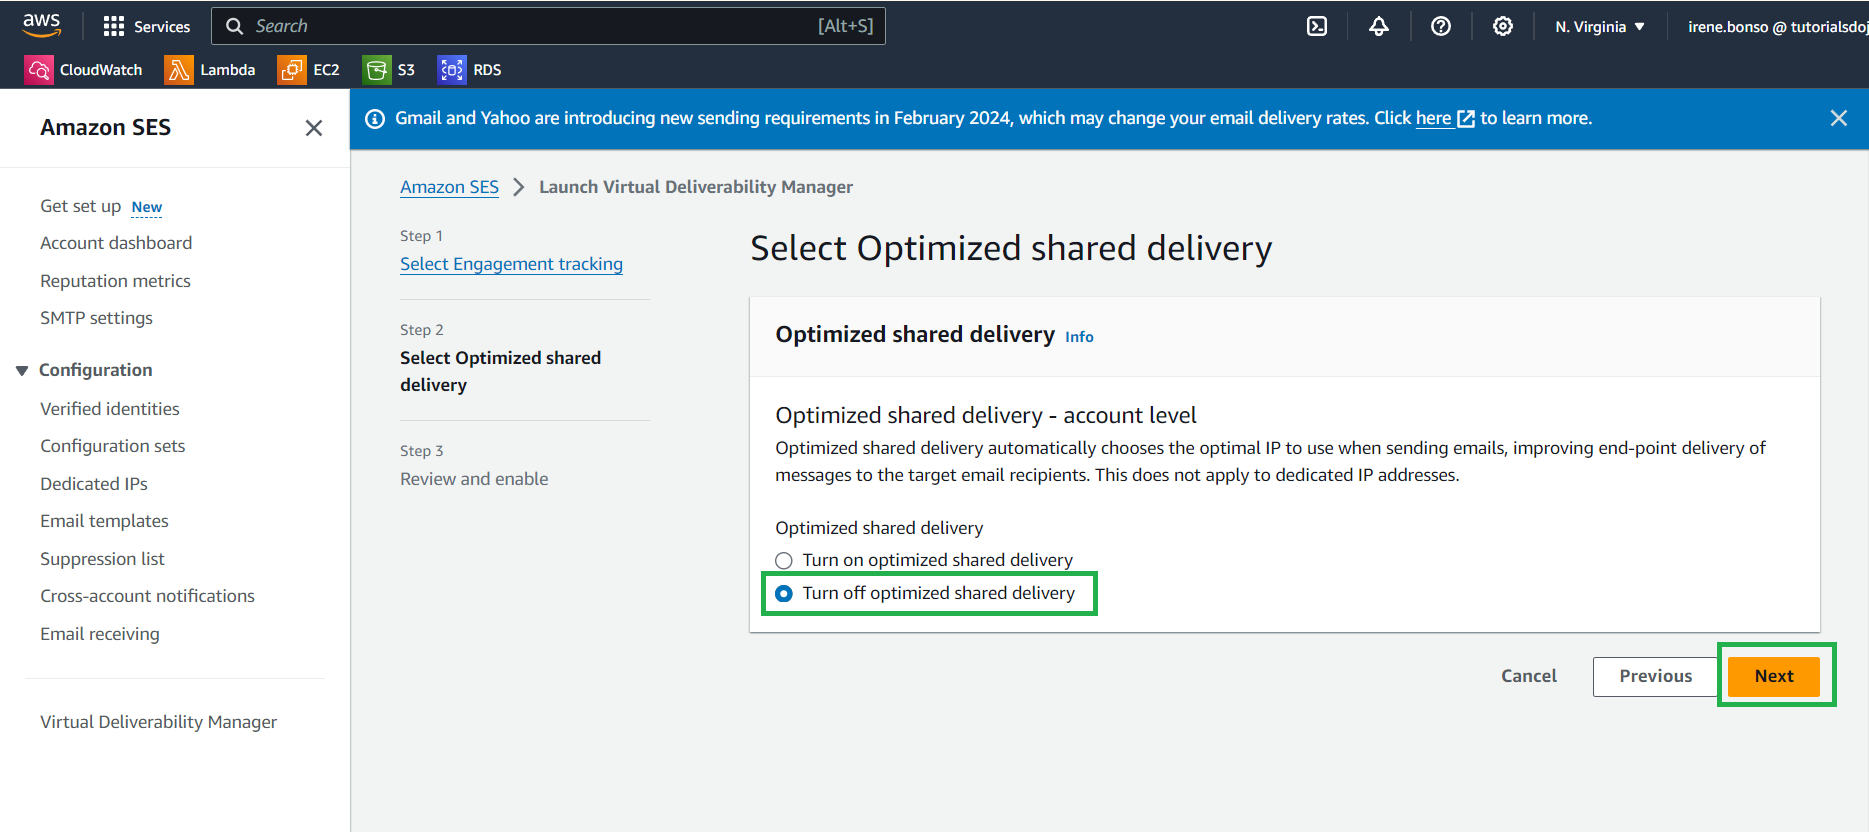 Enabling Virtual Deliverability Manager in Amazon Simple Email Service (Amazon SES)